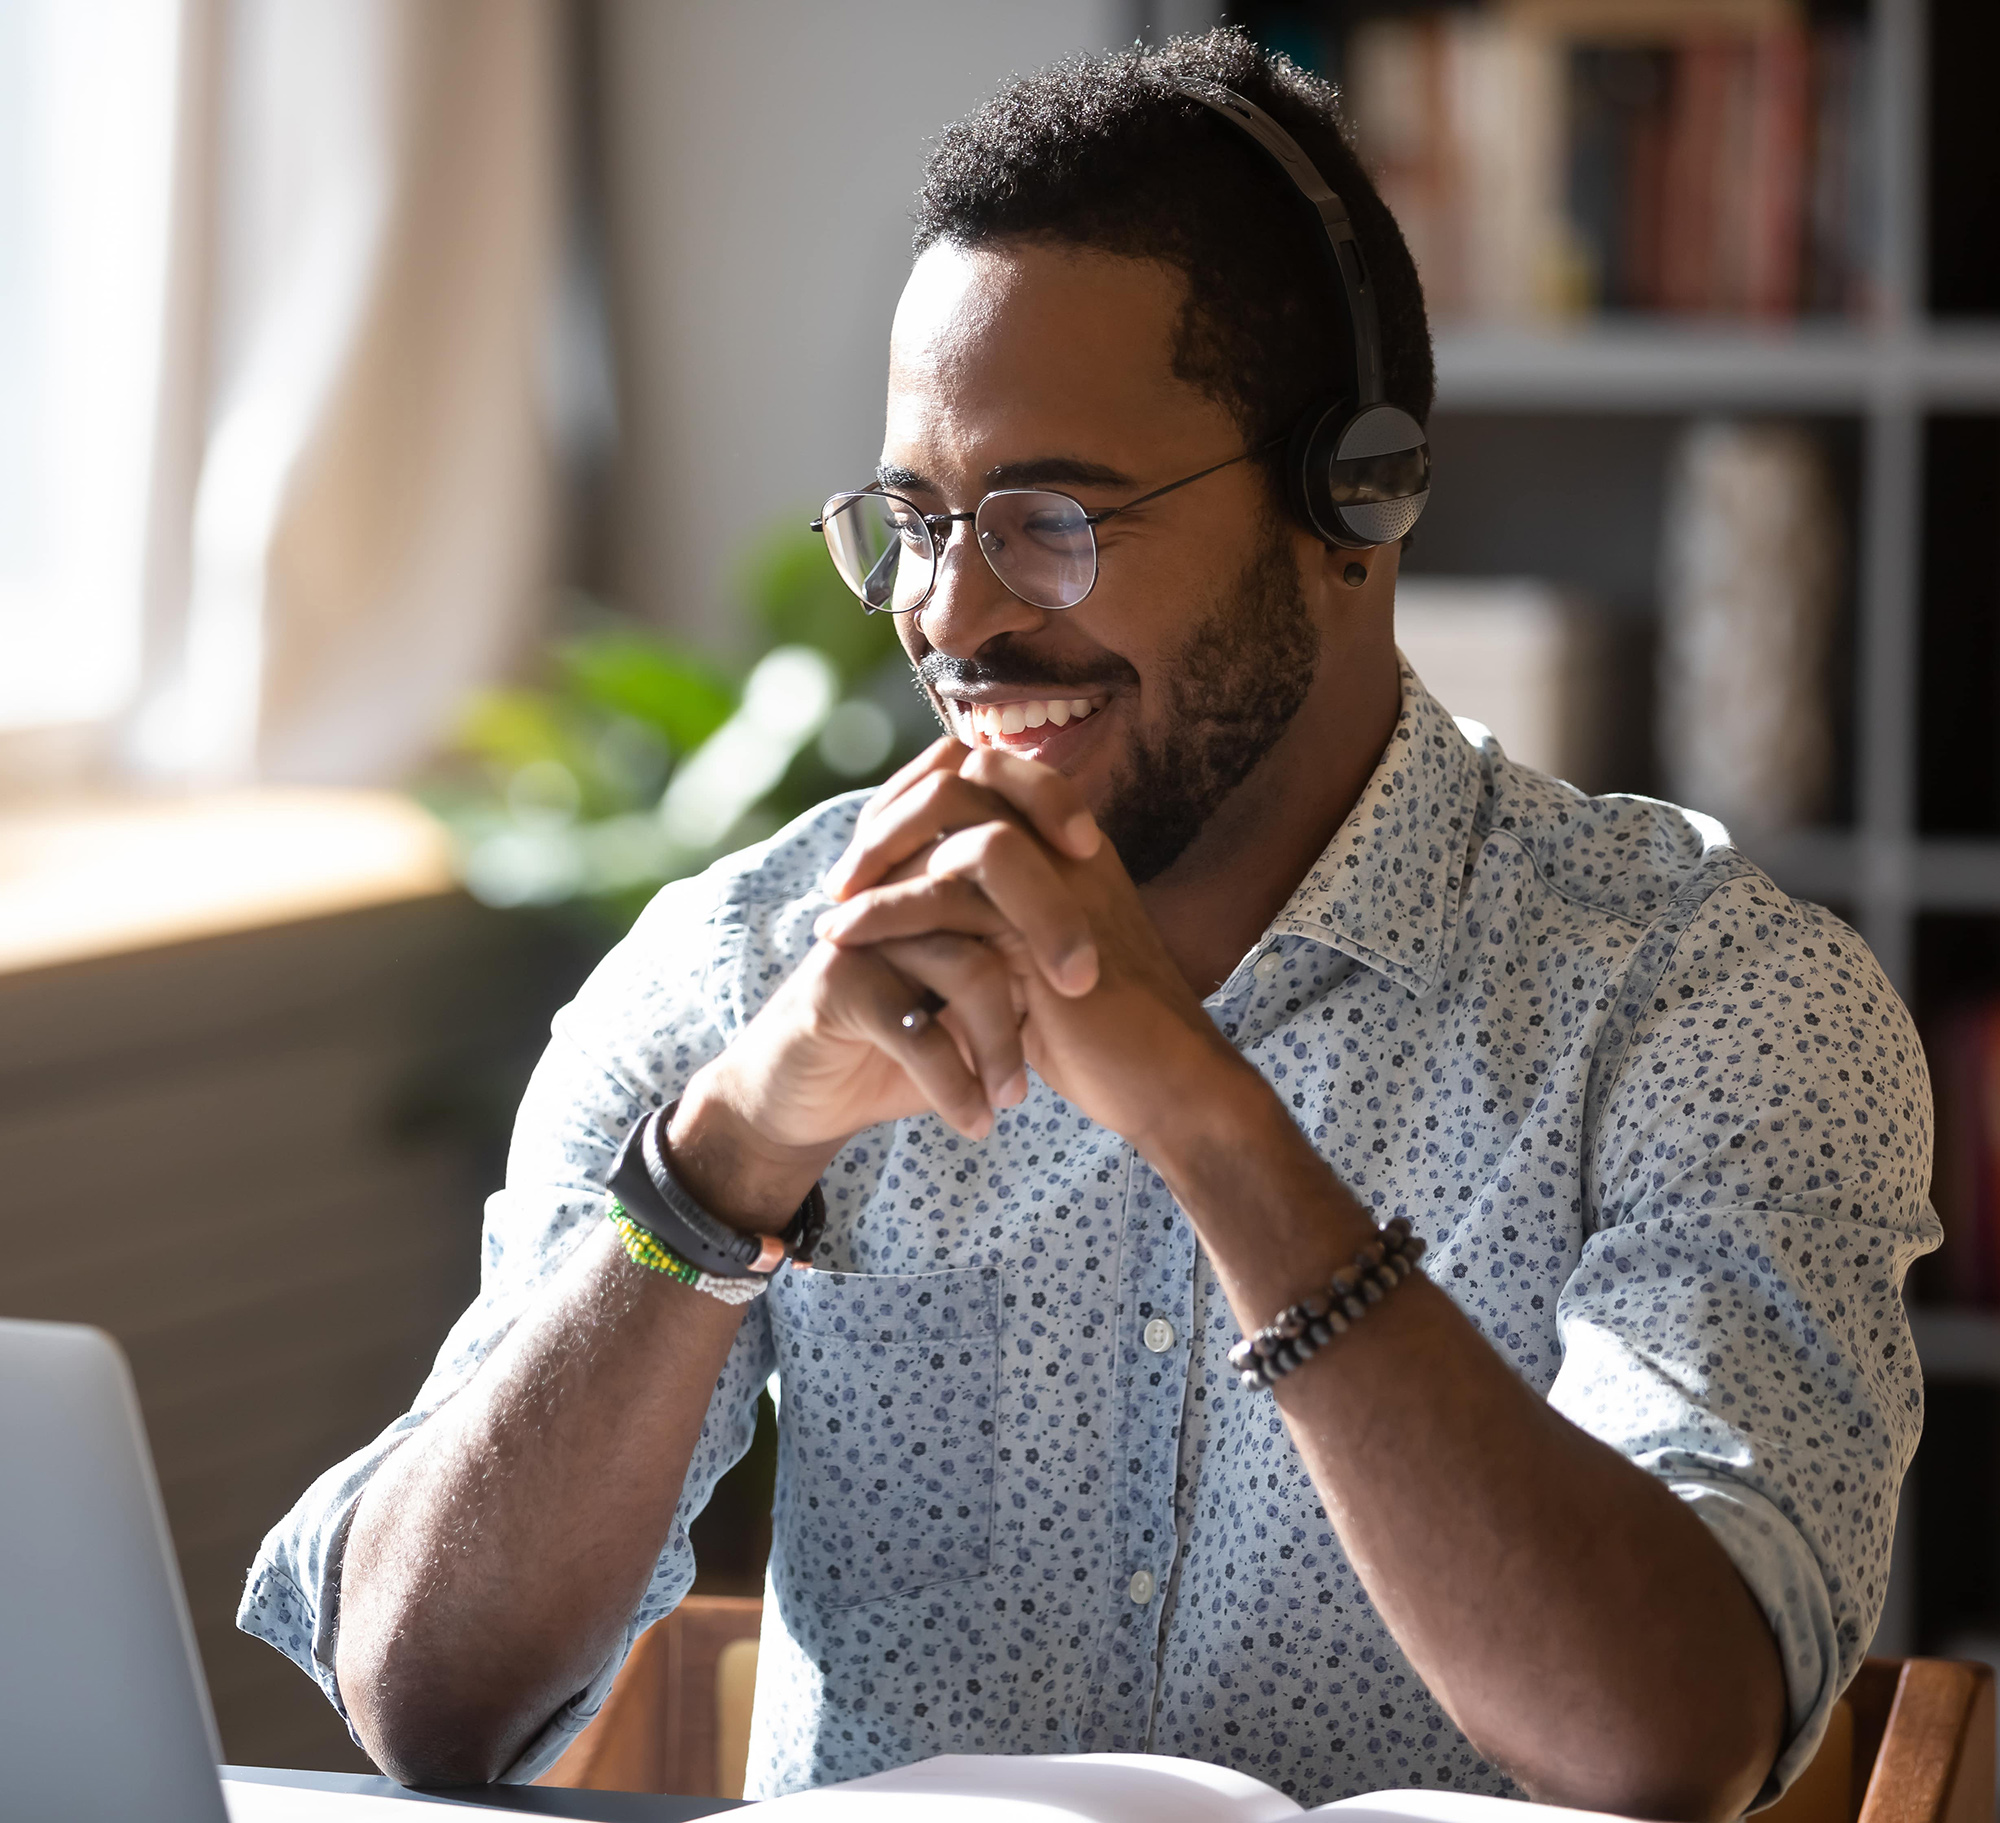 Image of a person working with headphones. This image could depict someone seeking anxiety treatment in new bern, nc. If you need help from an anxiety therapist, get connected here. | 28374 | 28403 | 27705